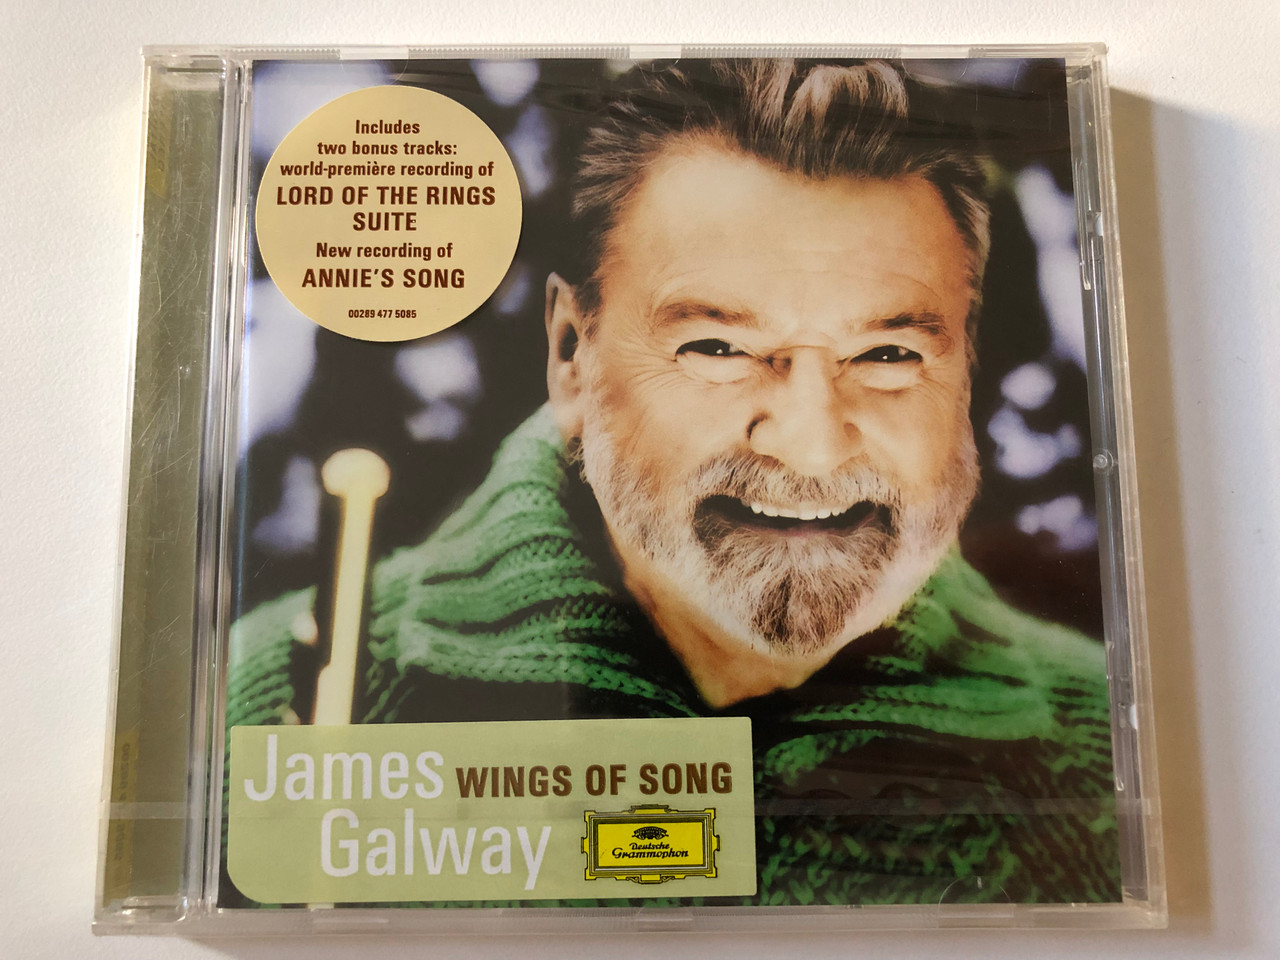 https://cdn10.bigcommerce.com/s-62bdpkt7pb/products/0/images/259025/James_Galway_Wings_Of_Song_Includes_two_bonus_tracks_world-premiere_recording_of_LORD_OF_THE_RINGS_SUITE_New_Recording_of_Annies_Song_Deutsche_Grammophon_Audio_CD_2004_Stereo_00289_4_1__33811.1668768978.1280.1280.JPG?c=2&_gl=1*1crnxdv*_ga*MjA2NTIxMjE2MC4xNTkwNTEyNTMy*_ga_WS2VZYPC6G*MTY2ODc2ODMzMC42MzUuMS4xNjY4NzY4ODIyLjExLjAuMA..